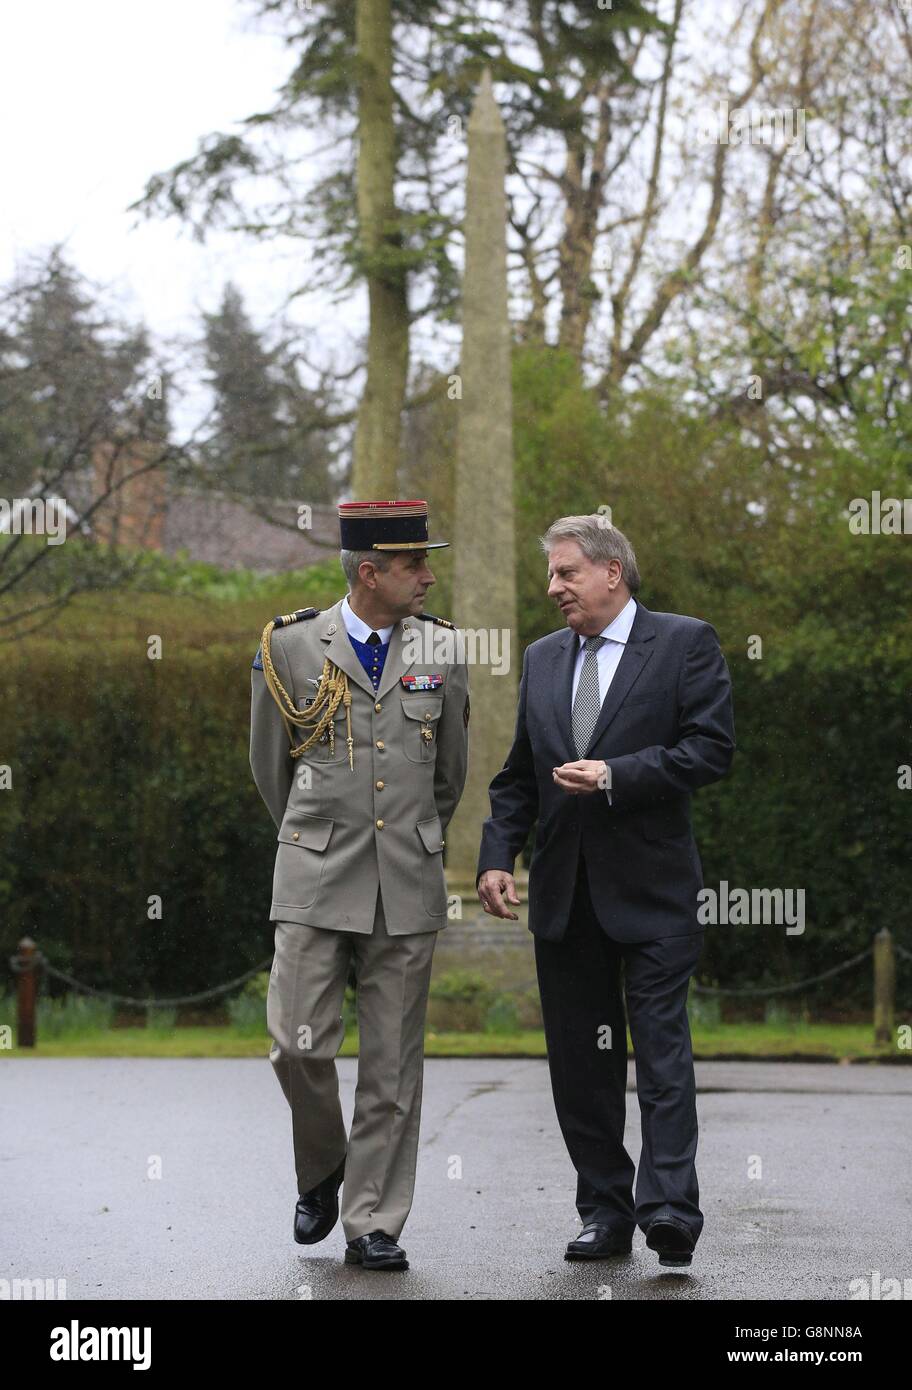 Colonel Antoine De Loustal (left), the Defence Attache for the French Embassy in London, and Heritage Minister David Evennett visit the Promenade de Verdun memorial landscape and obelisk in Croydon, which has been awarded Grade II listed status in honour of the centenary of the Battle of Verdun. Stock Photo